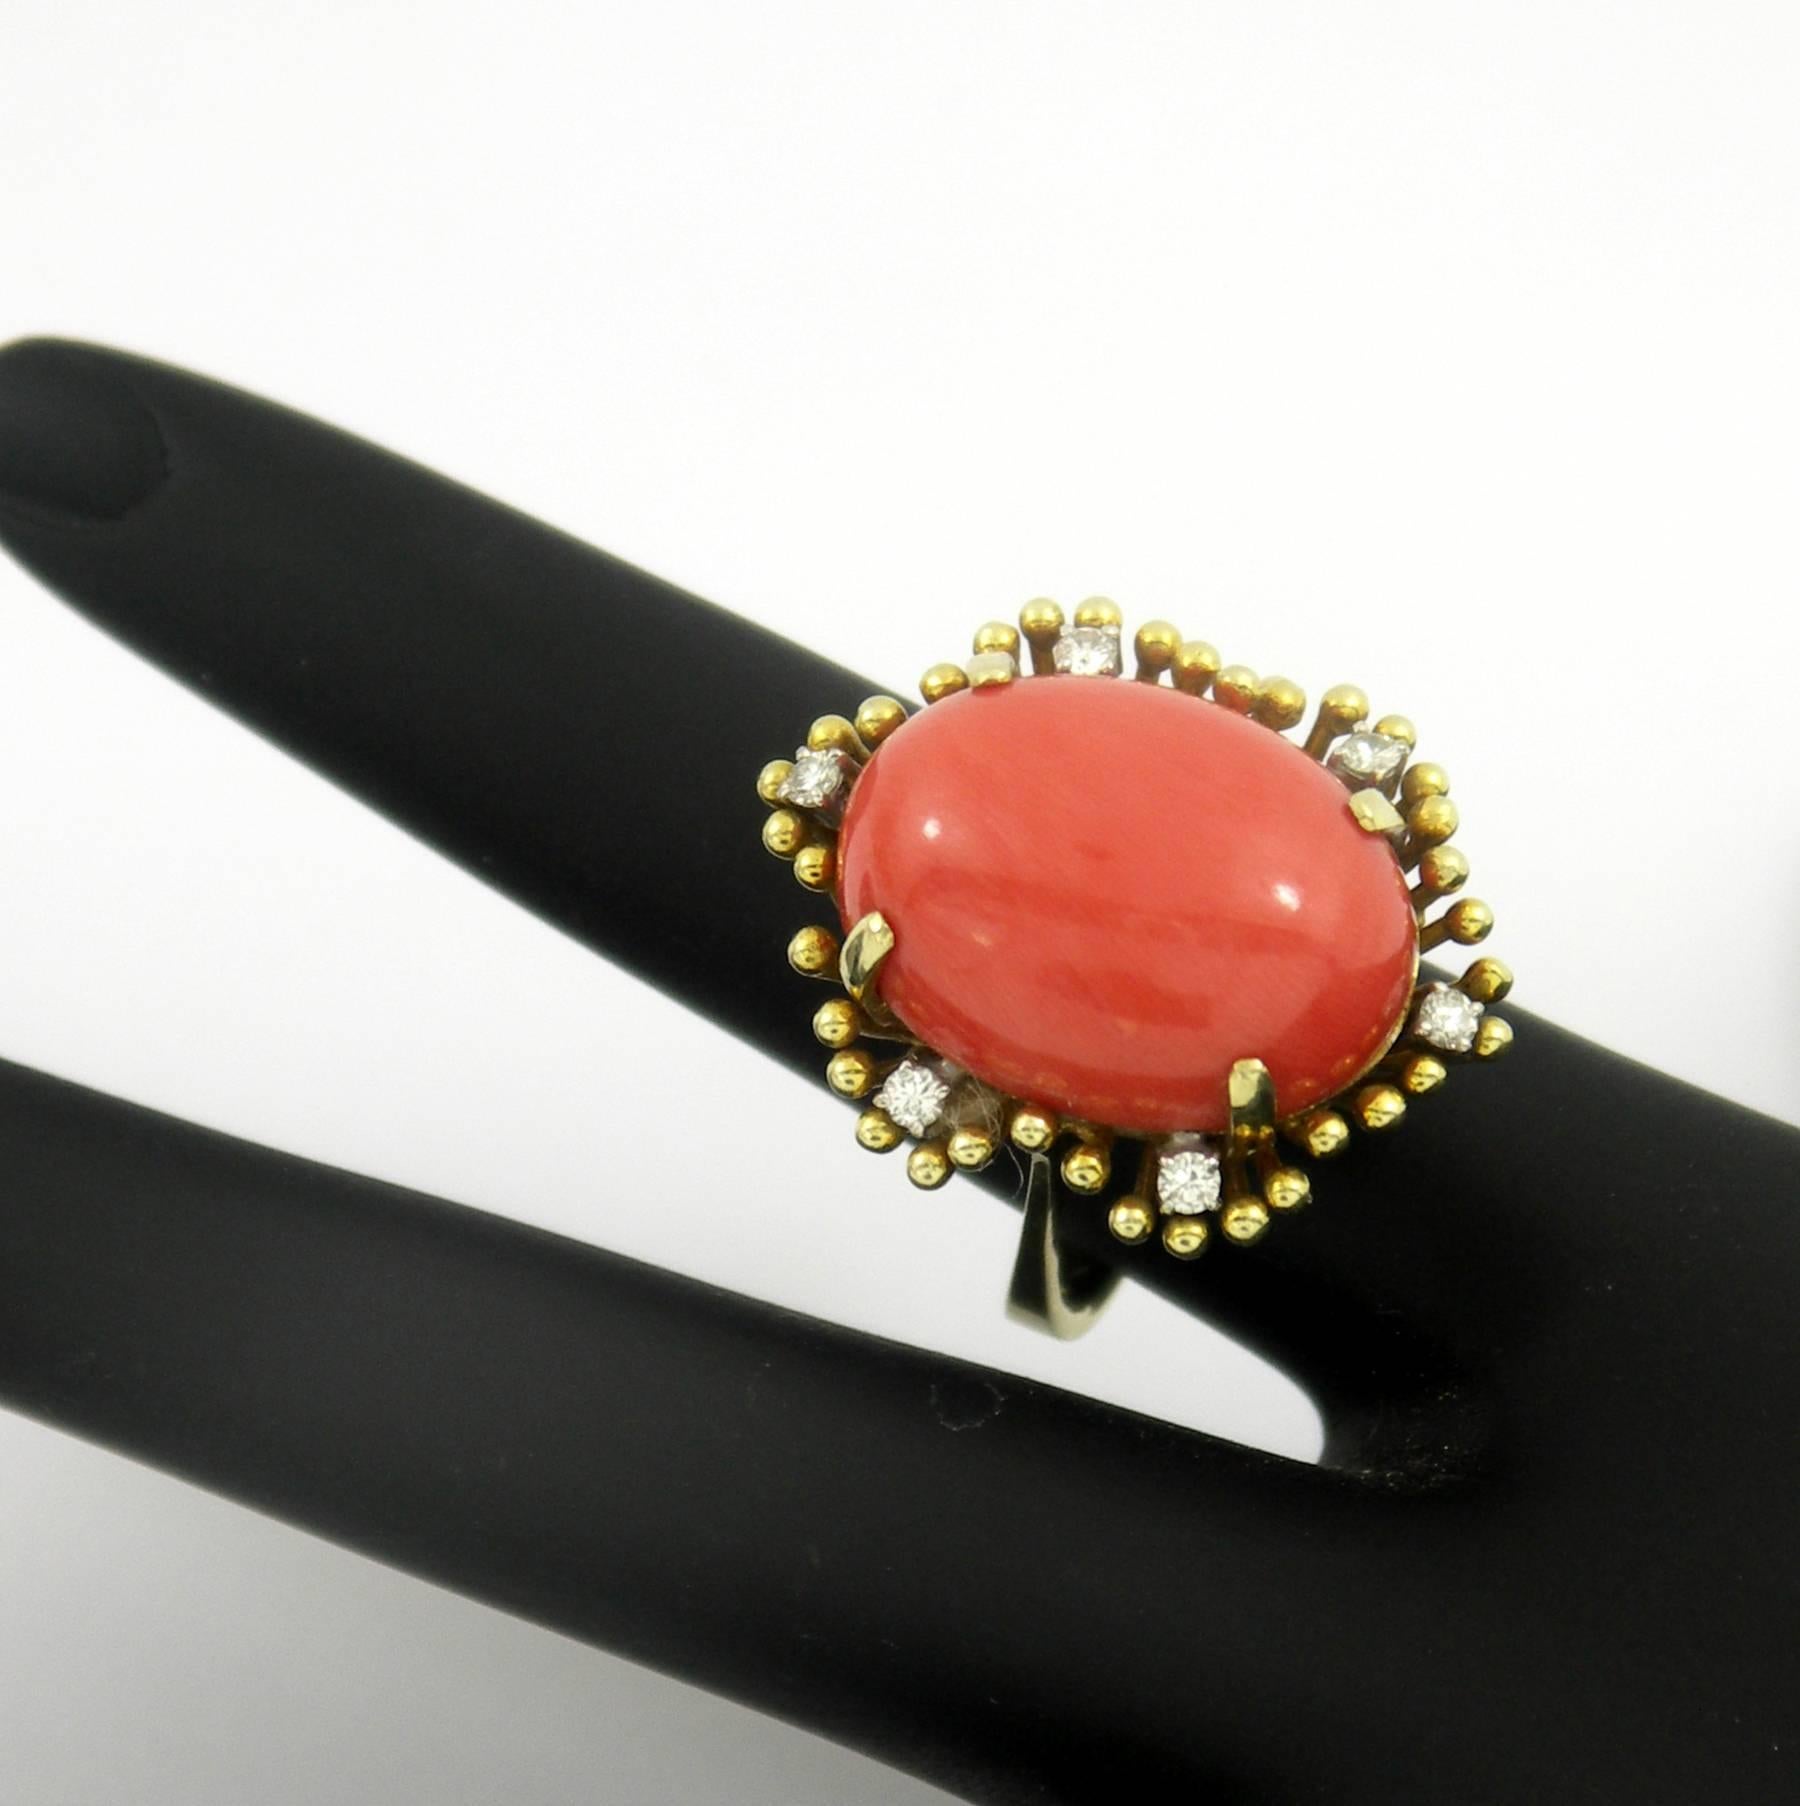 A ladies mid-century 14K yellow gold ring set with one oval coral measuring 20mm X 15mm. The ring incorporates an almost floral design with beaded gold posts that resemble the stamens of a flower or a starburst. There are six diamonds positioned